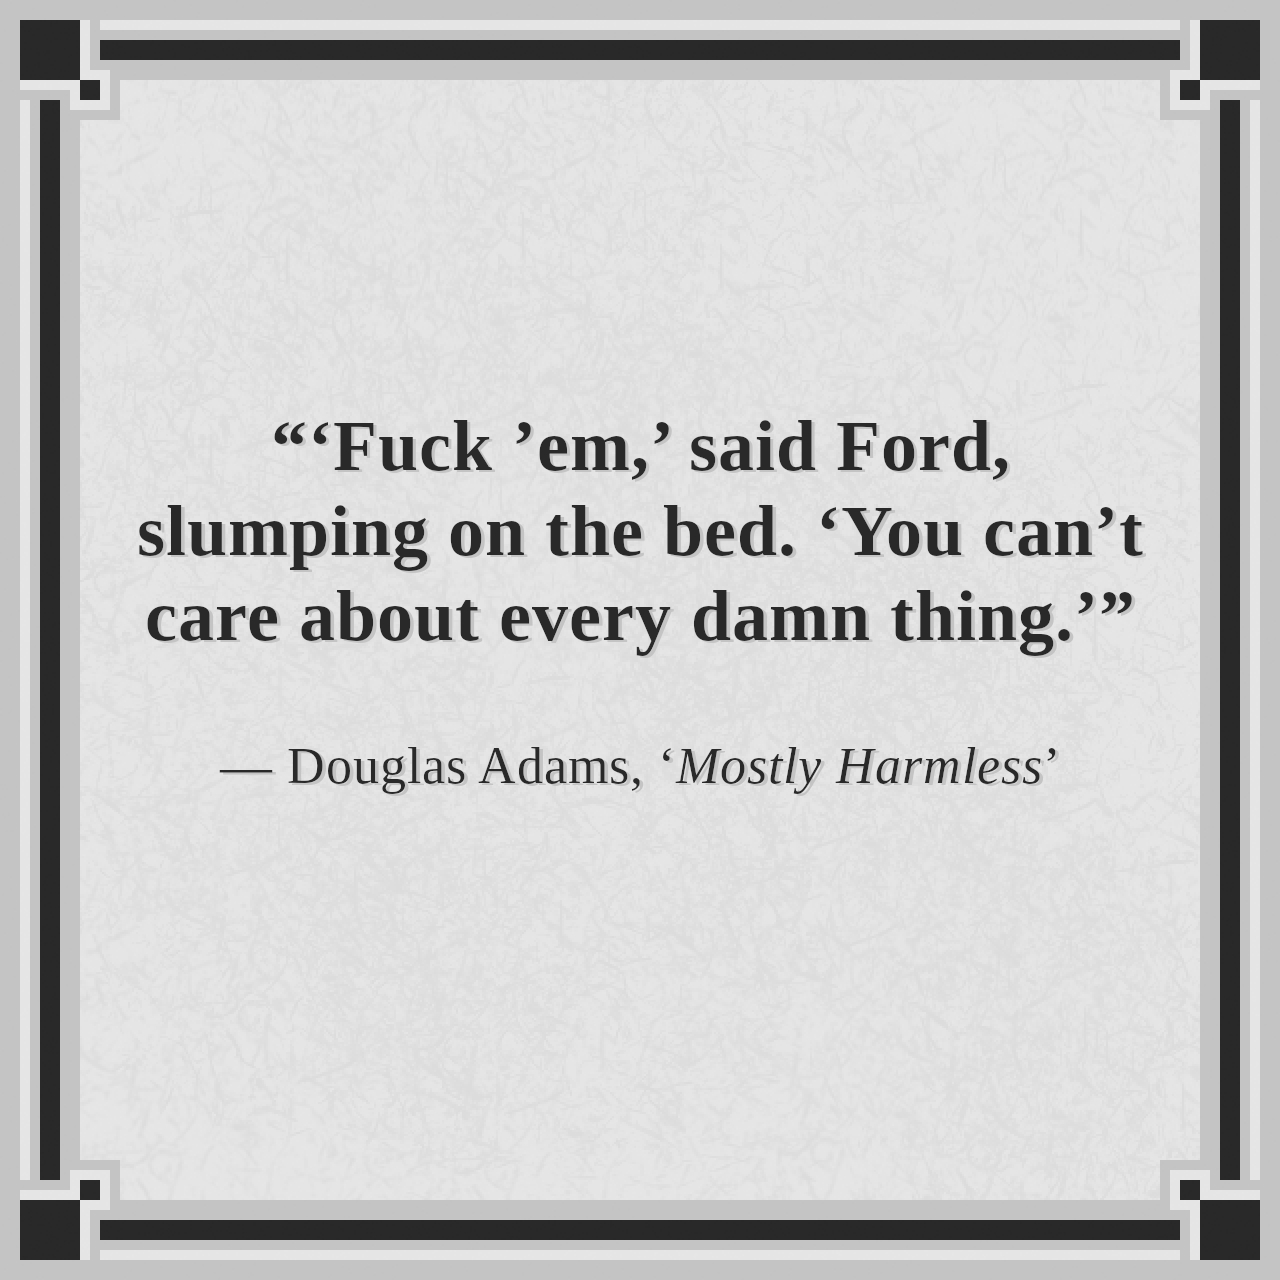 “‘Fuck ’em,’ said Ford, slumping on the bed. ‘You can’t care about every damn thing.’”

— Douglas Adams, ‘Mostly Harmless’